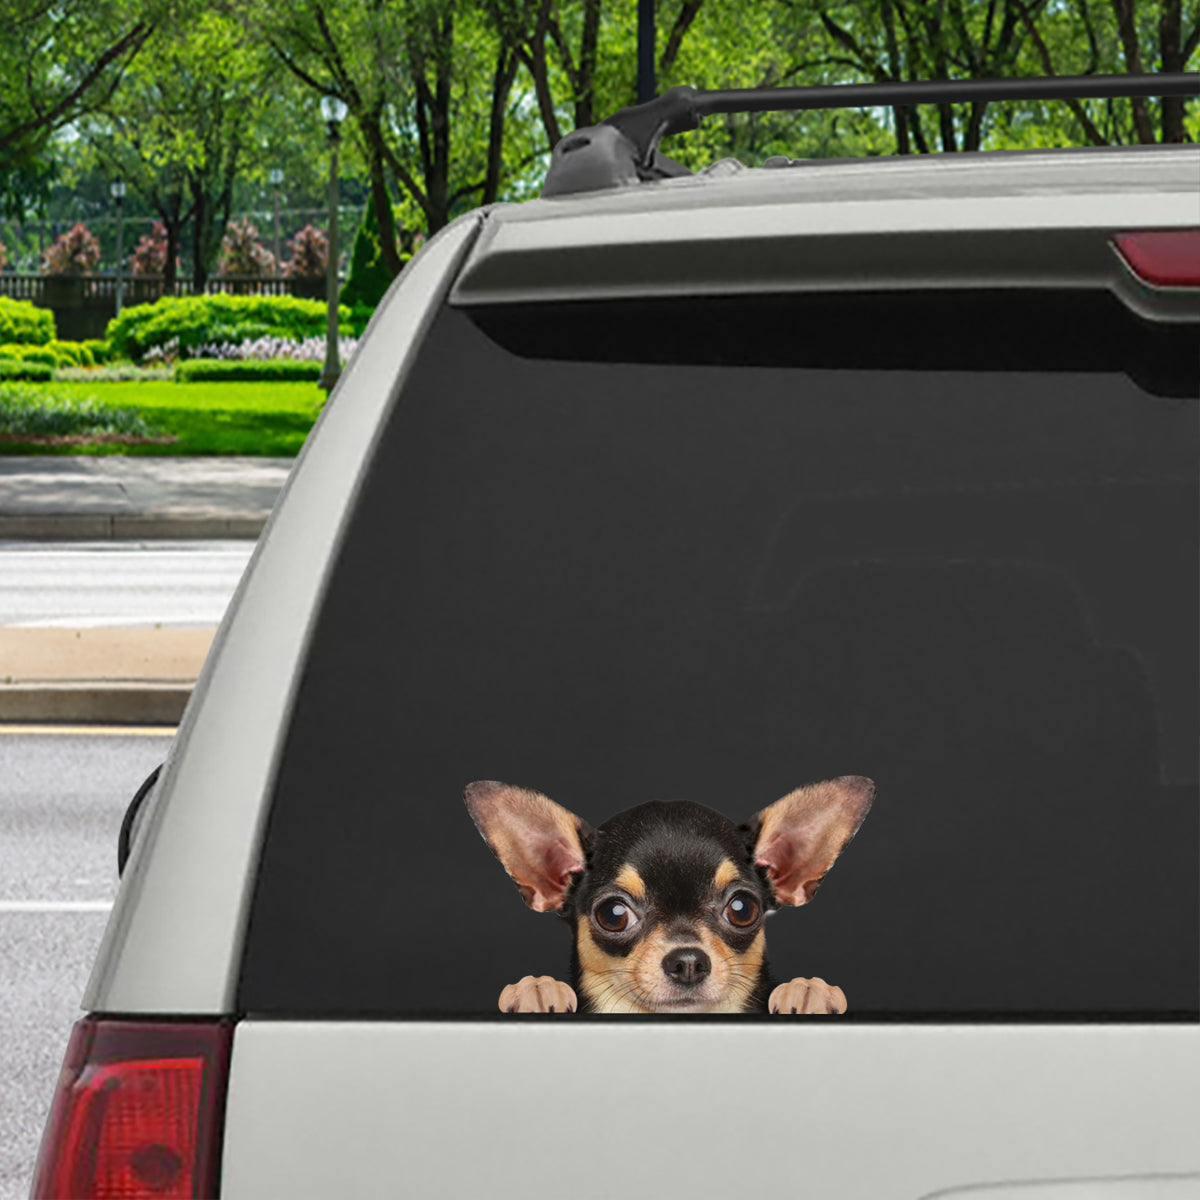 Can You See Me Now - Chihuahua Car/ Door/ Fridge/ Laptop Sticker V2